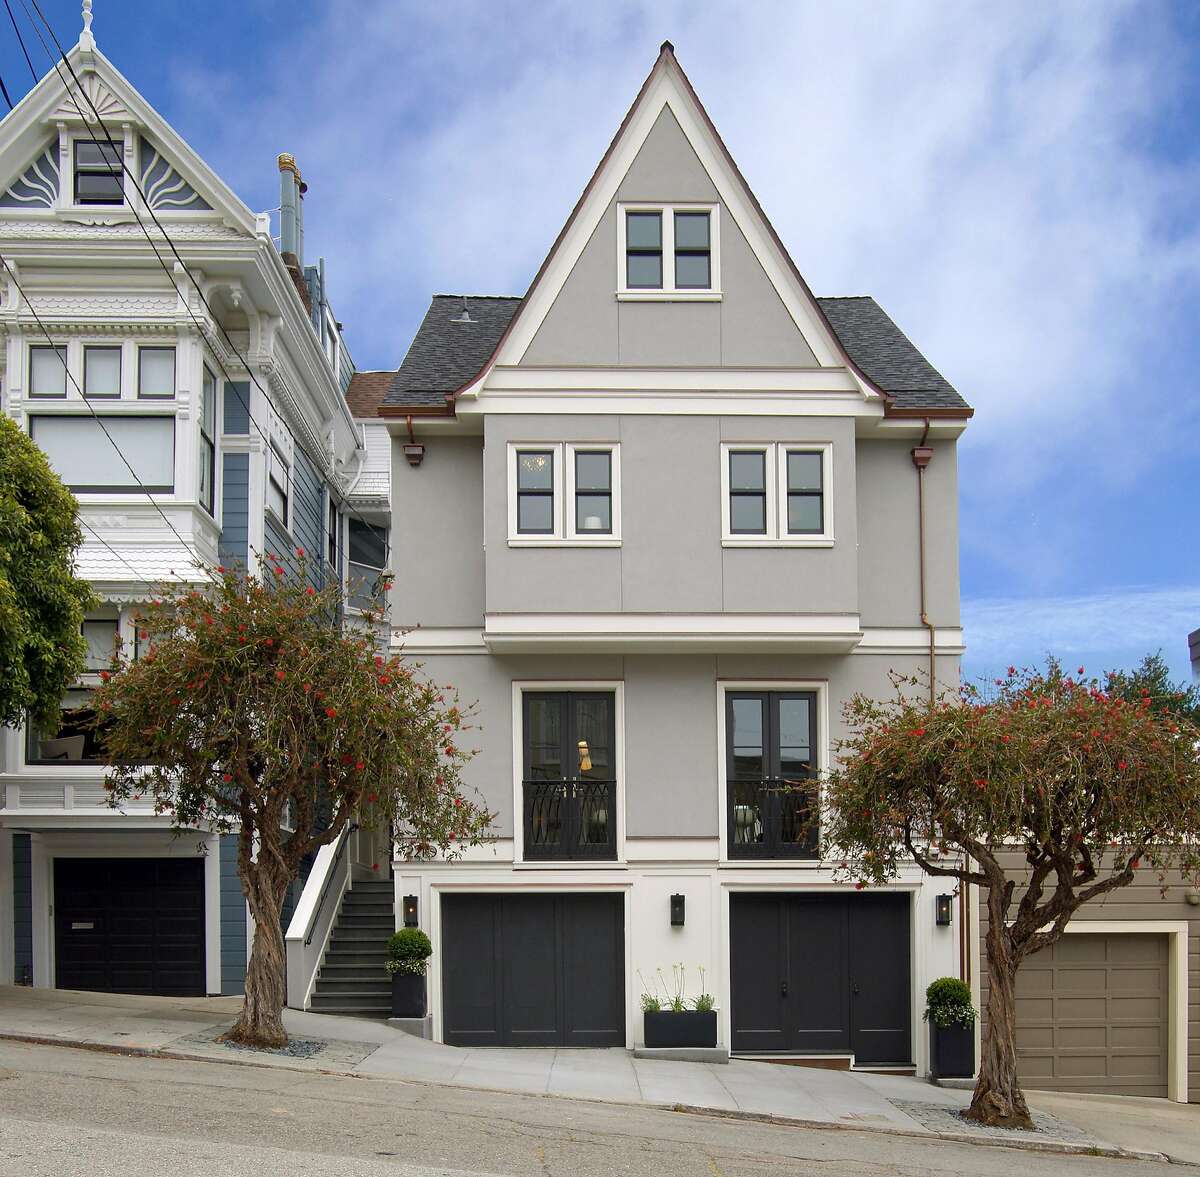 2208-2210 Broderick St. in Pacific Heights is a fully updated five-bedroom near Fillmore Street and Alta Plaza Park.